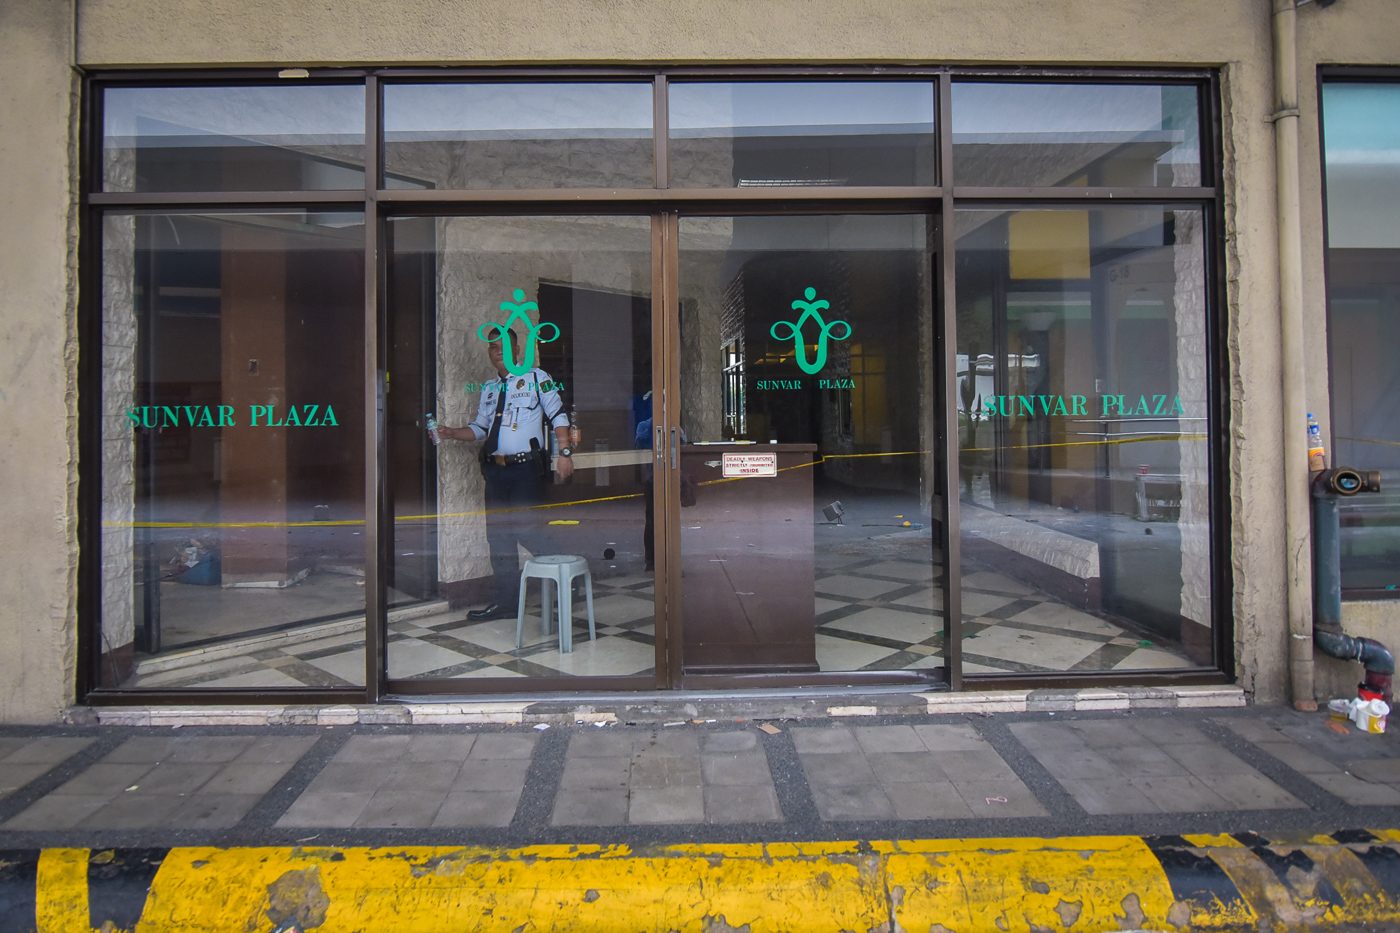 CLOSED. Security guards padlock the entrance of the Sunvar Plaza on August 18, 2017, after the government enforced a vacate order 